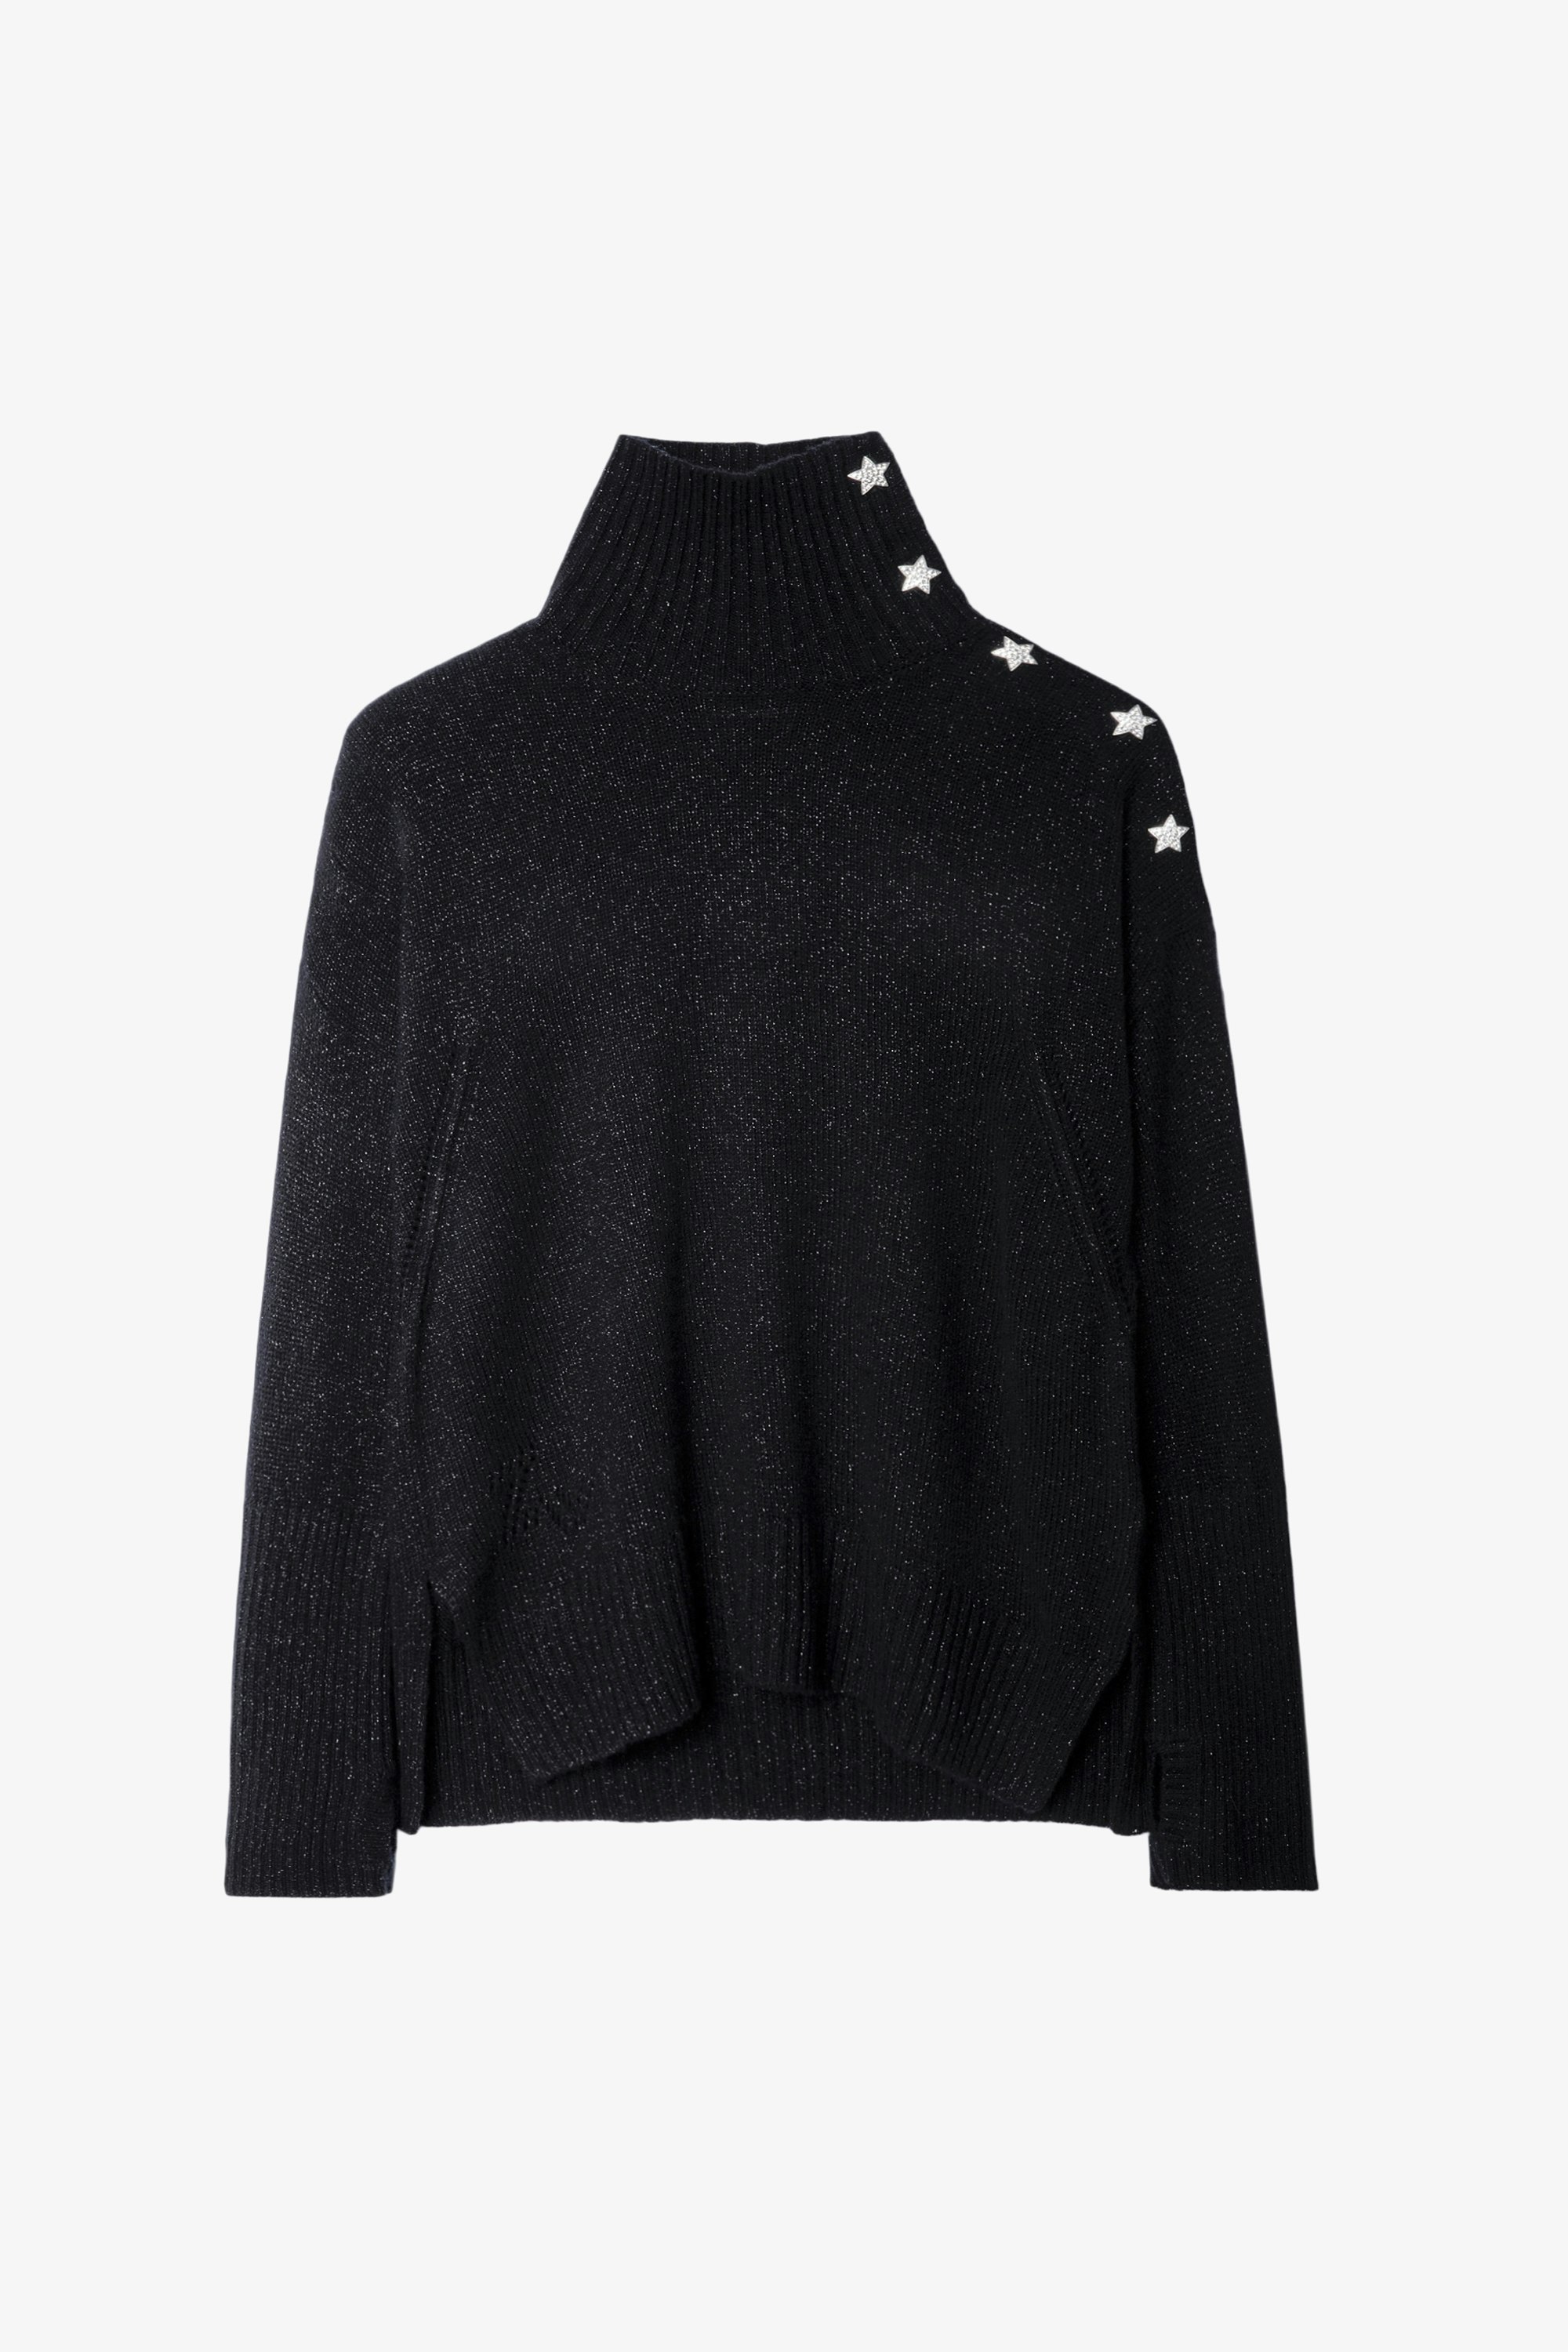 Alma Jewelled Jumper - Women's black cashmere jumper with star buttons.